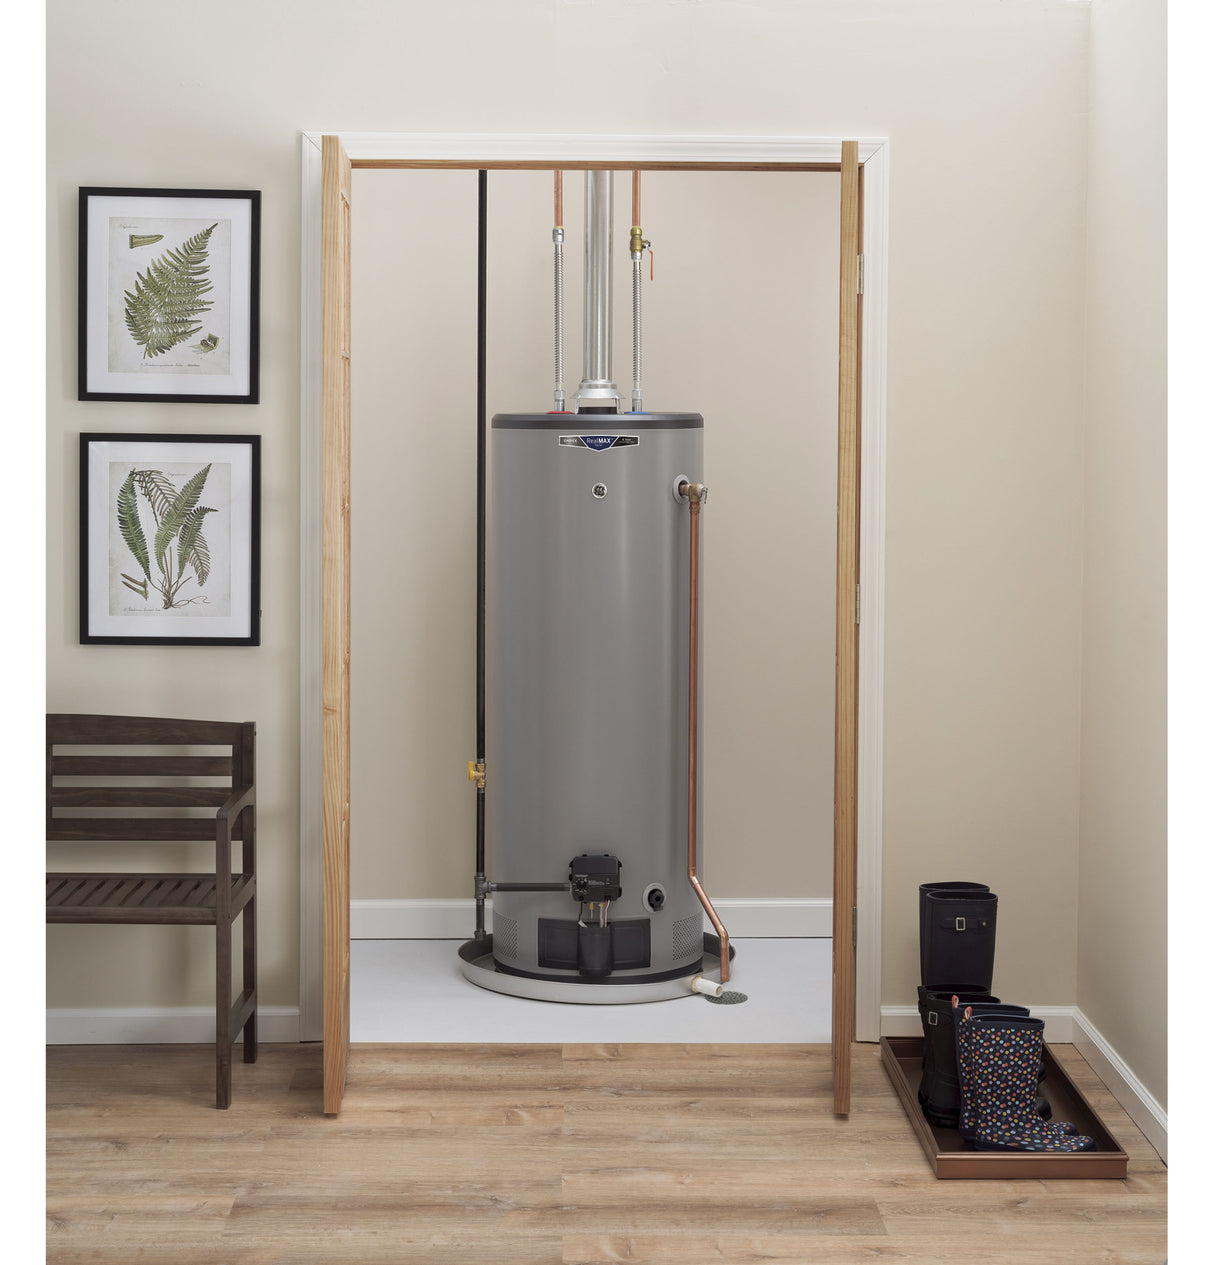 GE RealMAX Choice 40-Gallon Tall Natural Gas Atmospheric Water Heater - (GG40T08BXR)